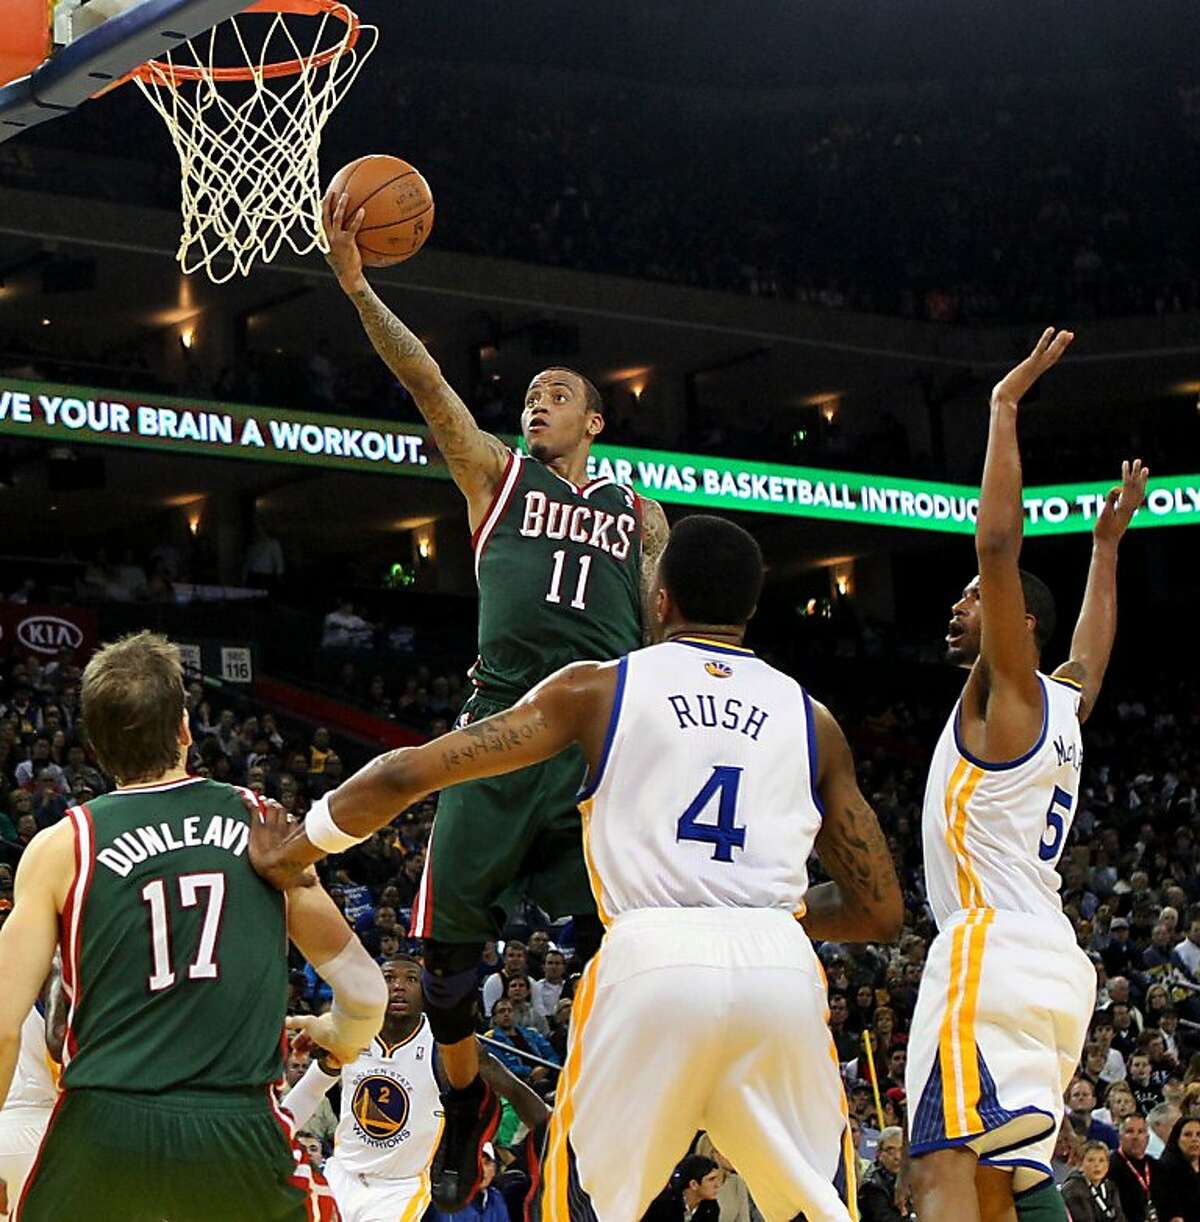 Milwaukee Bucks' Monta Ellis scores over his old teammates during the first half of their game NBA basketball game with Golden State Warriors, Friday, March 16, 2012, in Oakland, Calif.